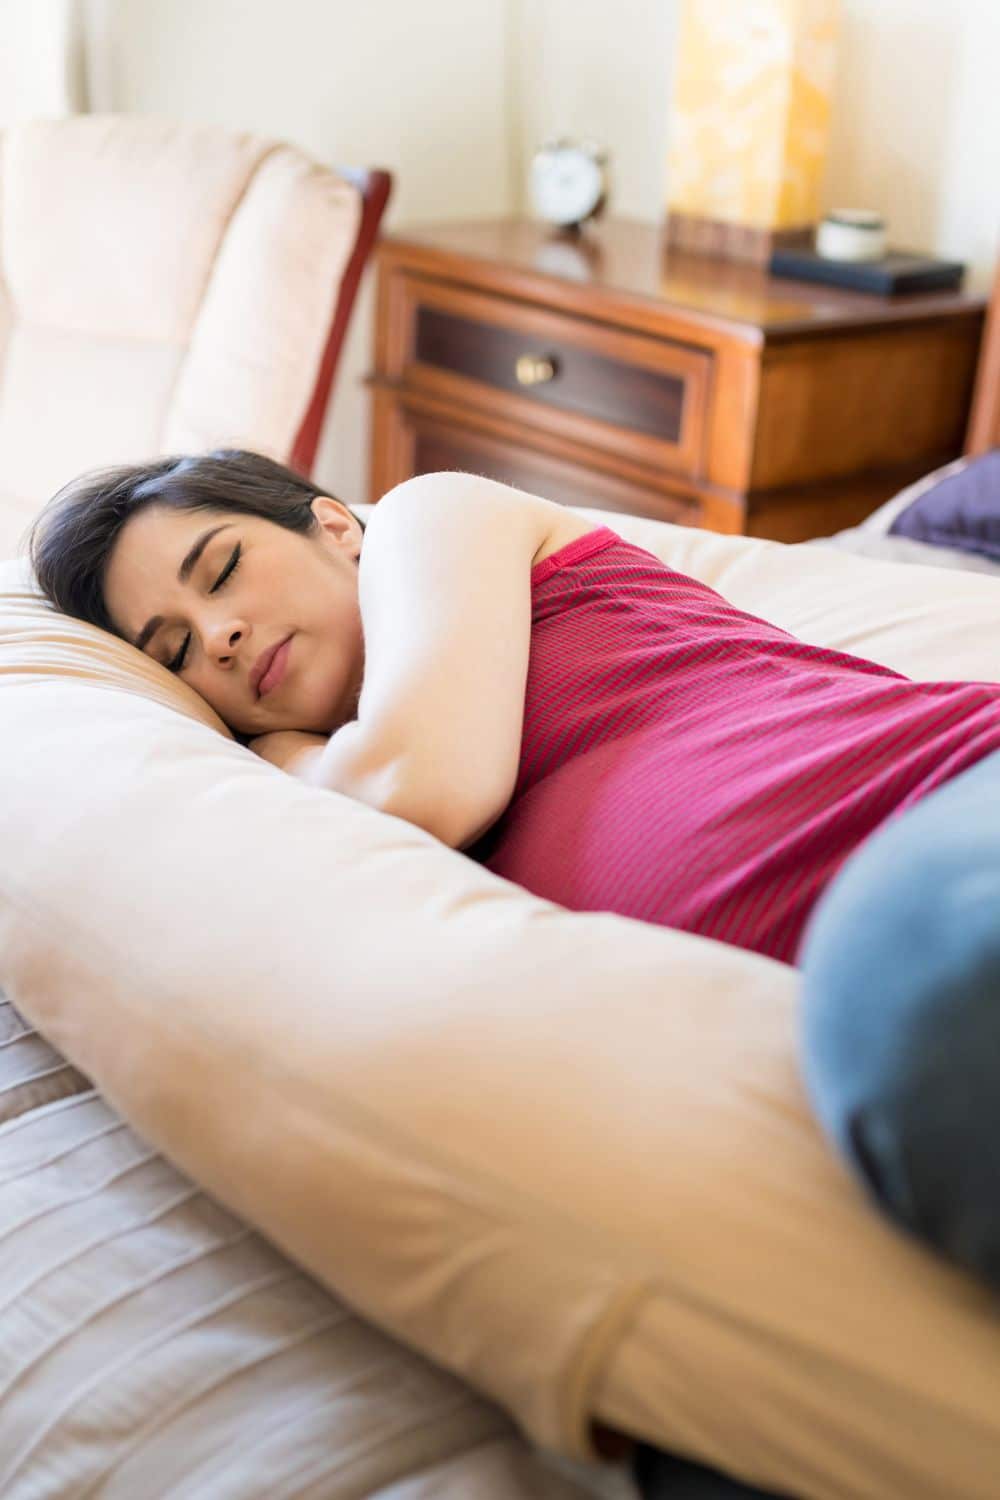 What Are the Benefits of Using a Full-Body Pregnancy Pillow for Better Sleep Quality